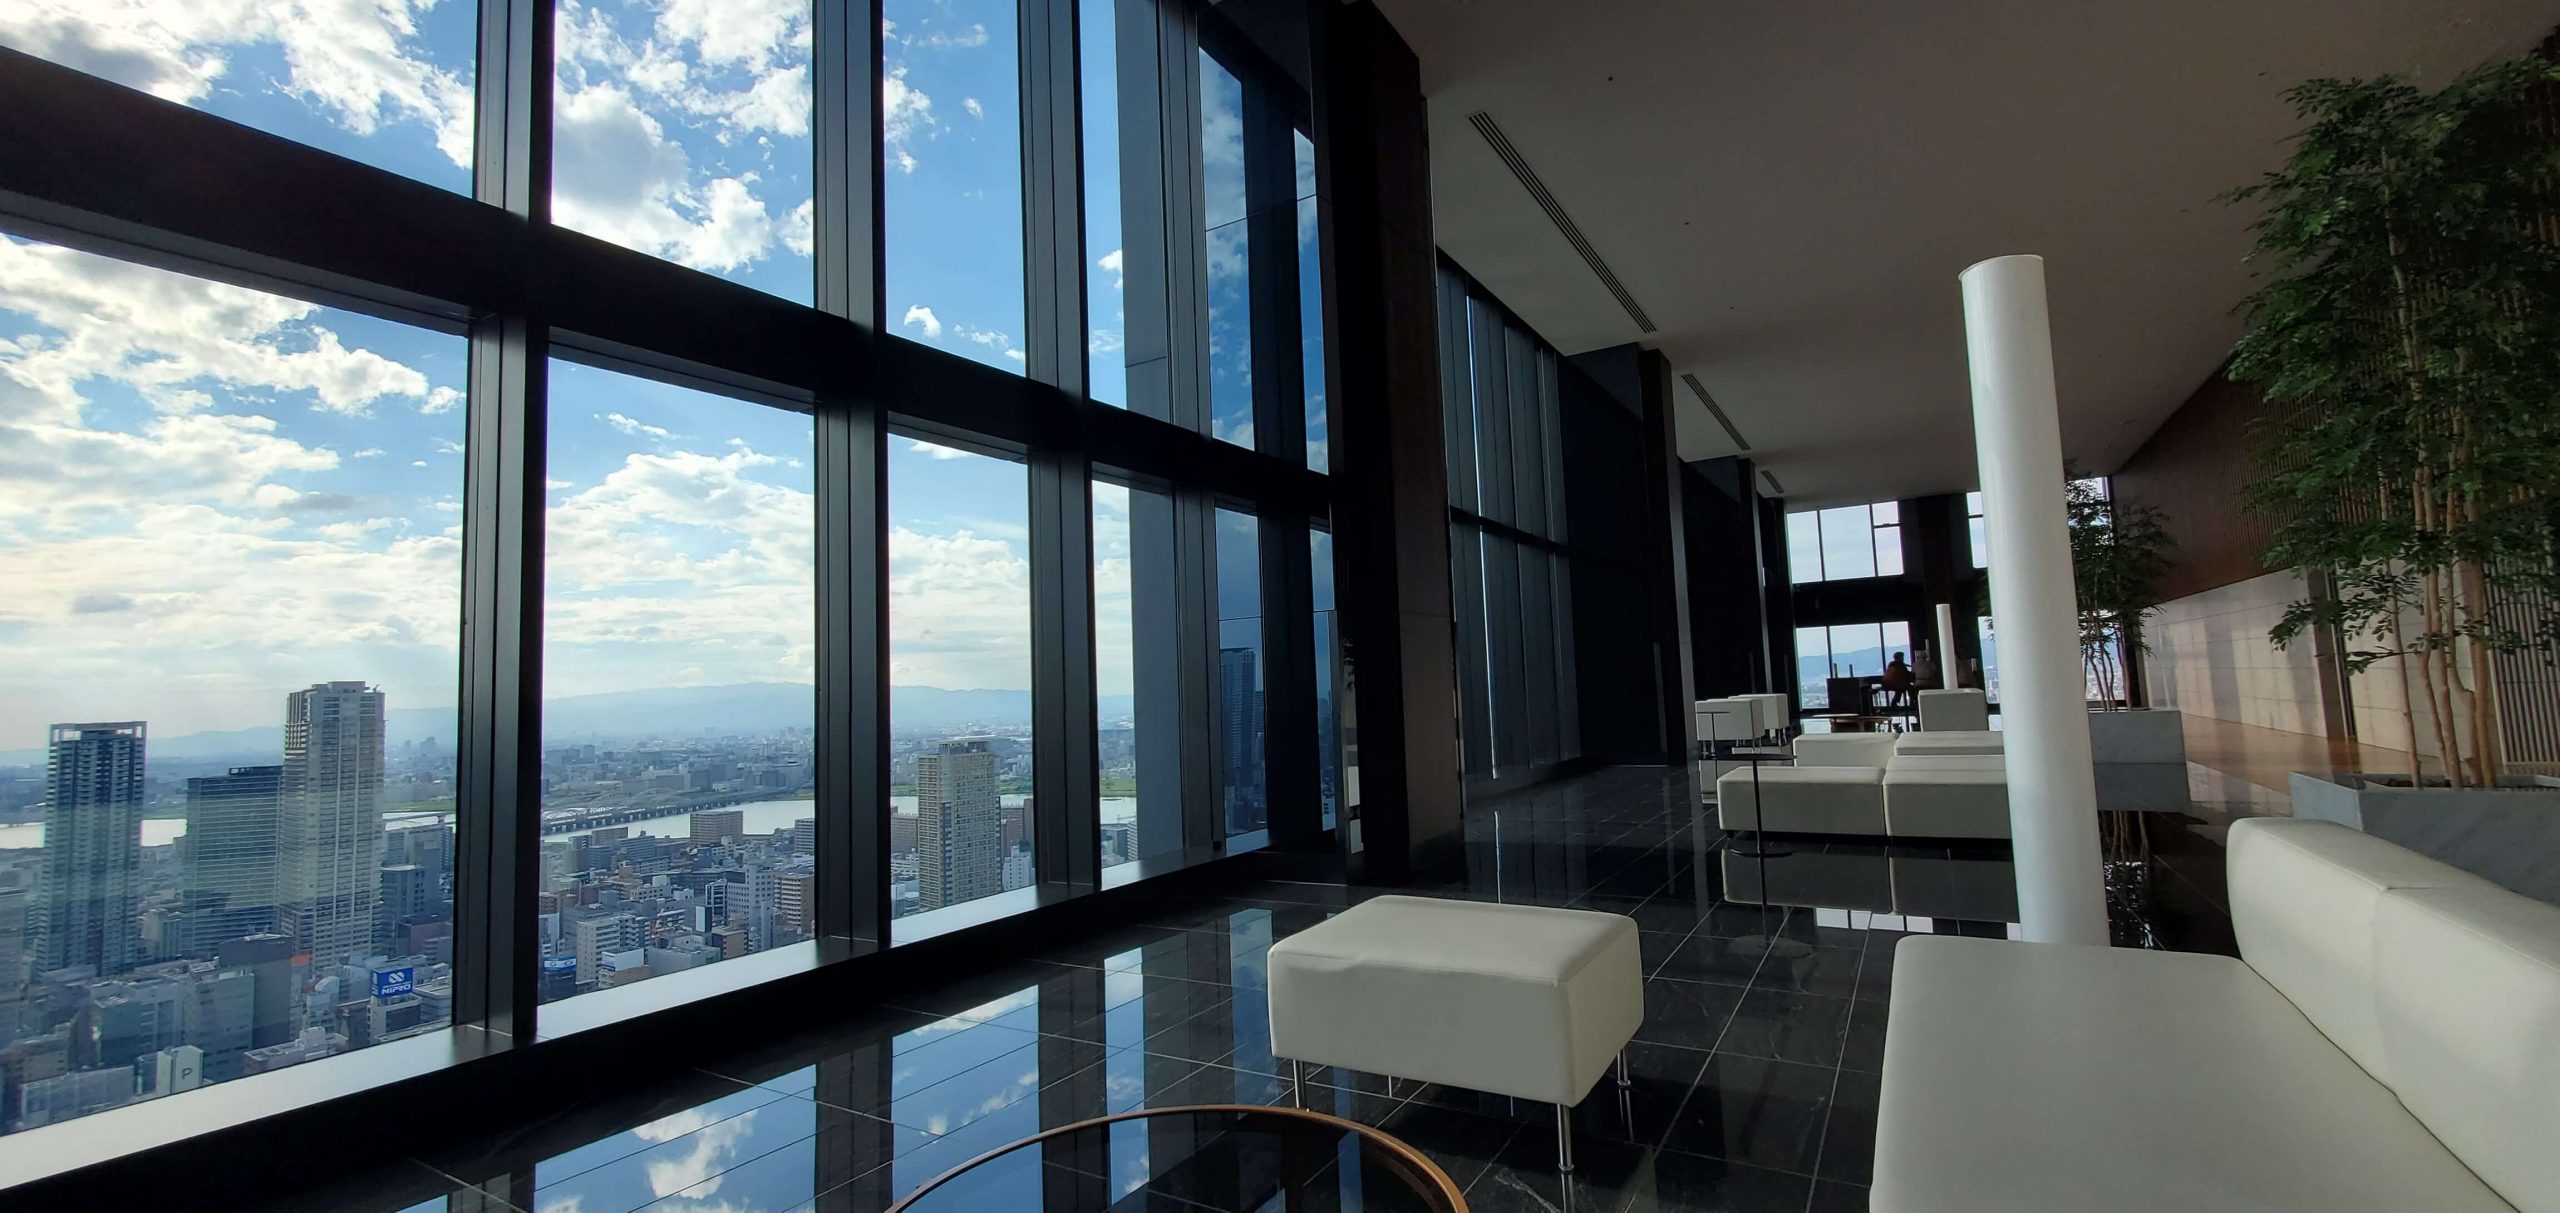 Excellent lounge on the top floor of a skyscraper